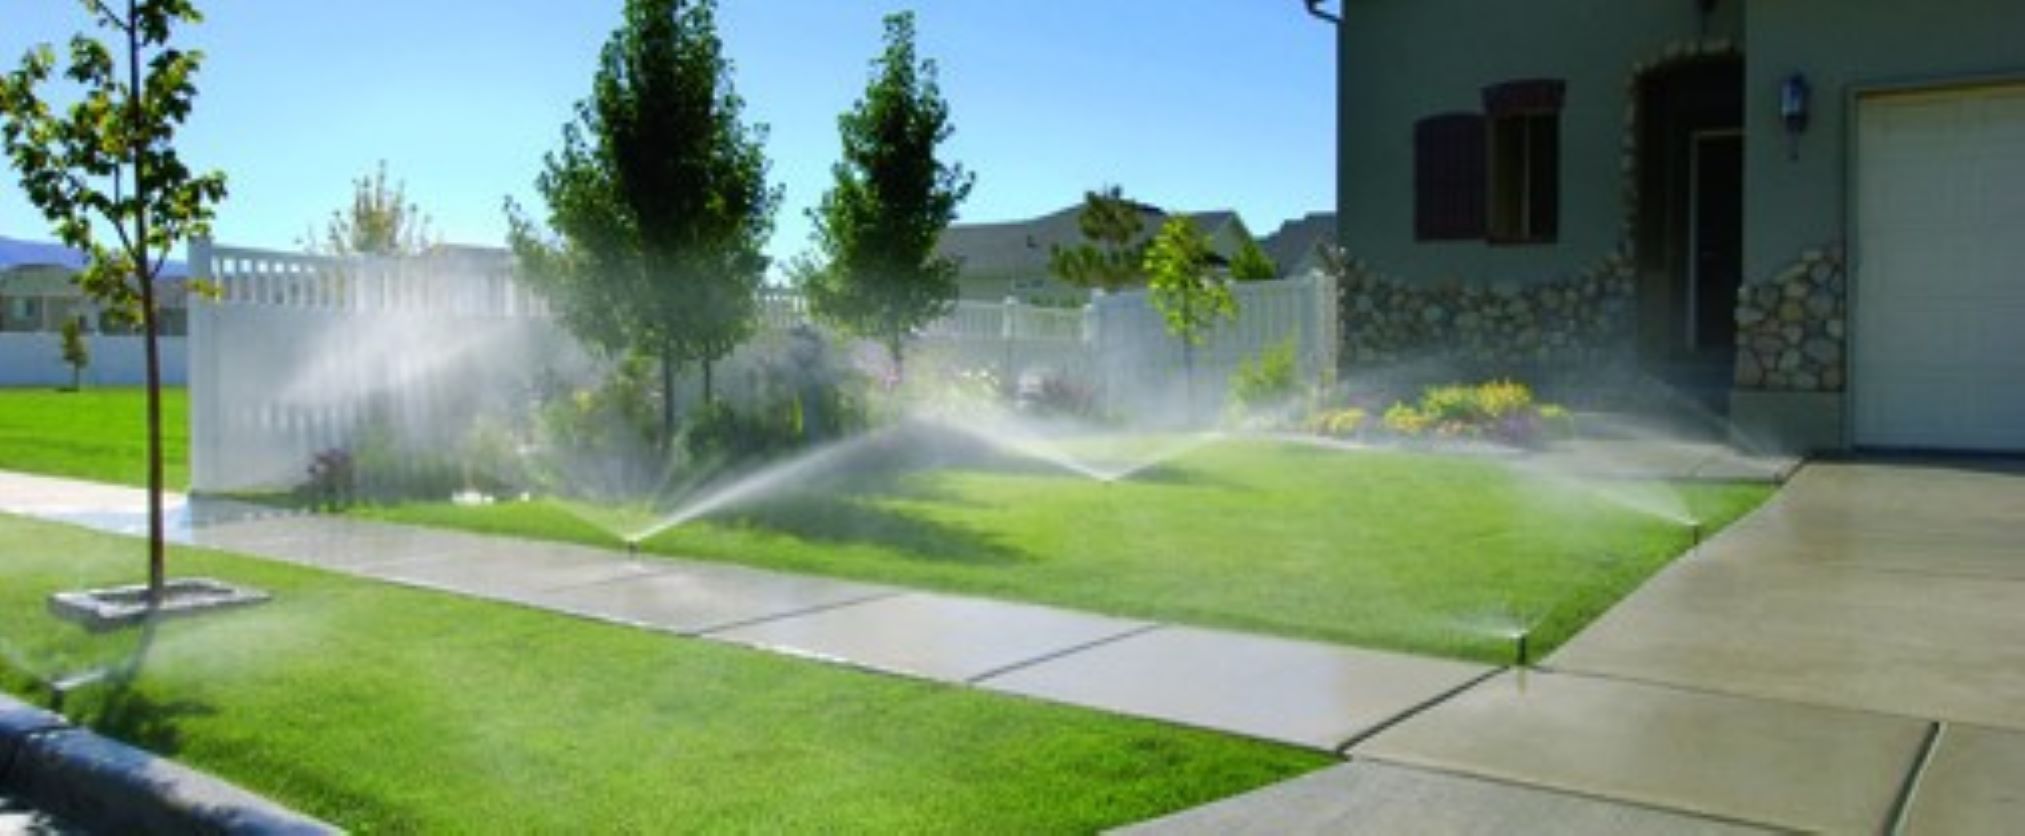 AUTOMATIC SPRINKLER SYSTEMS